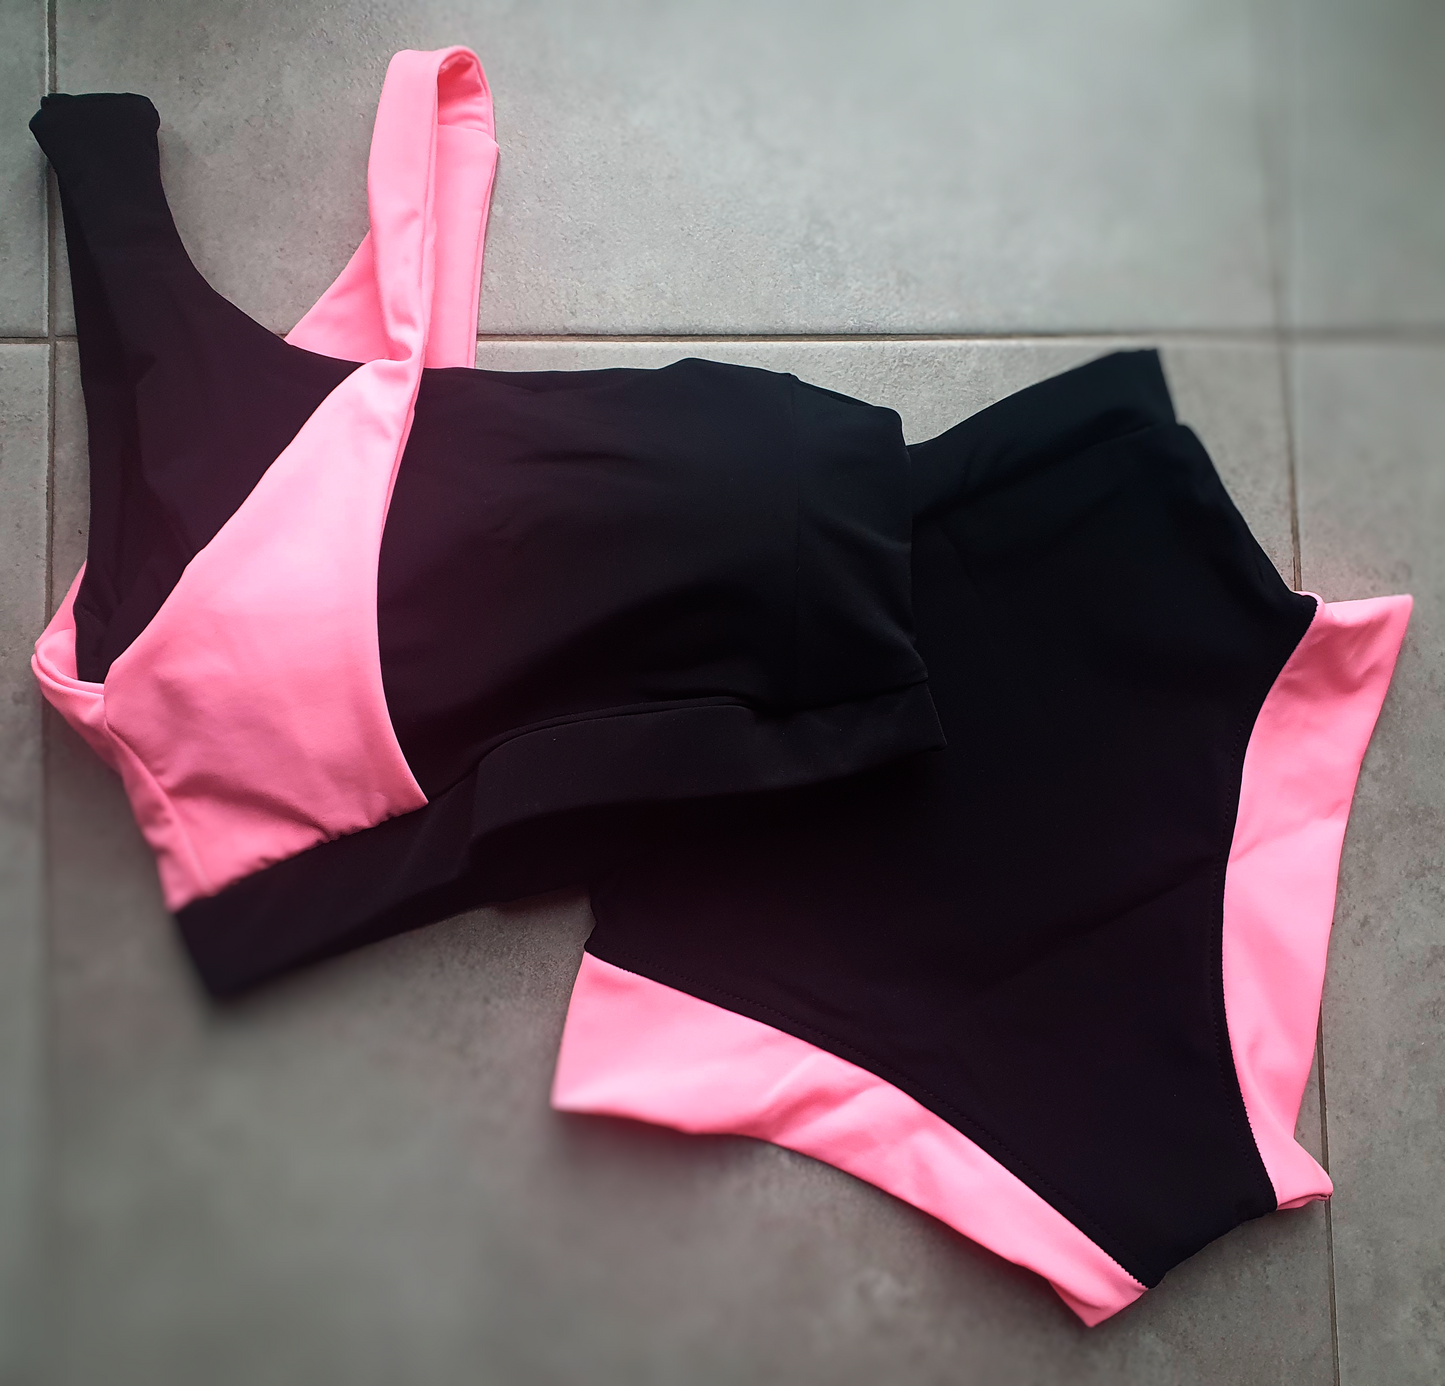 Pink and black pole dance costume 